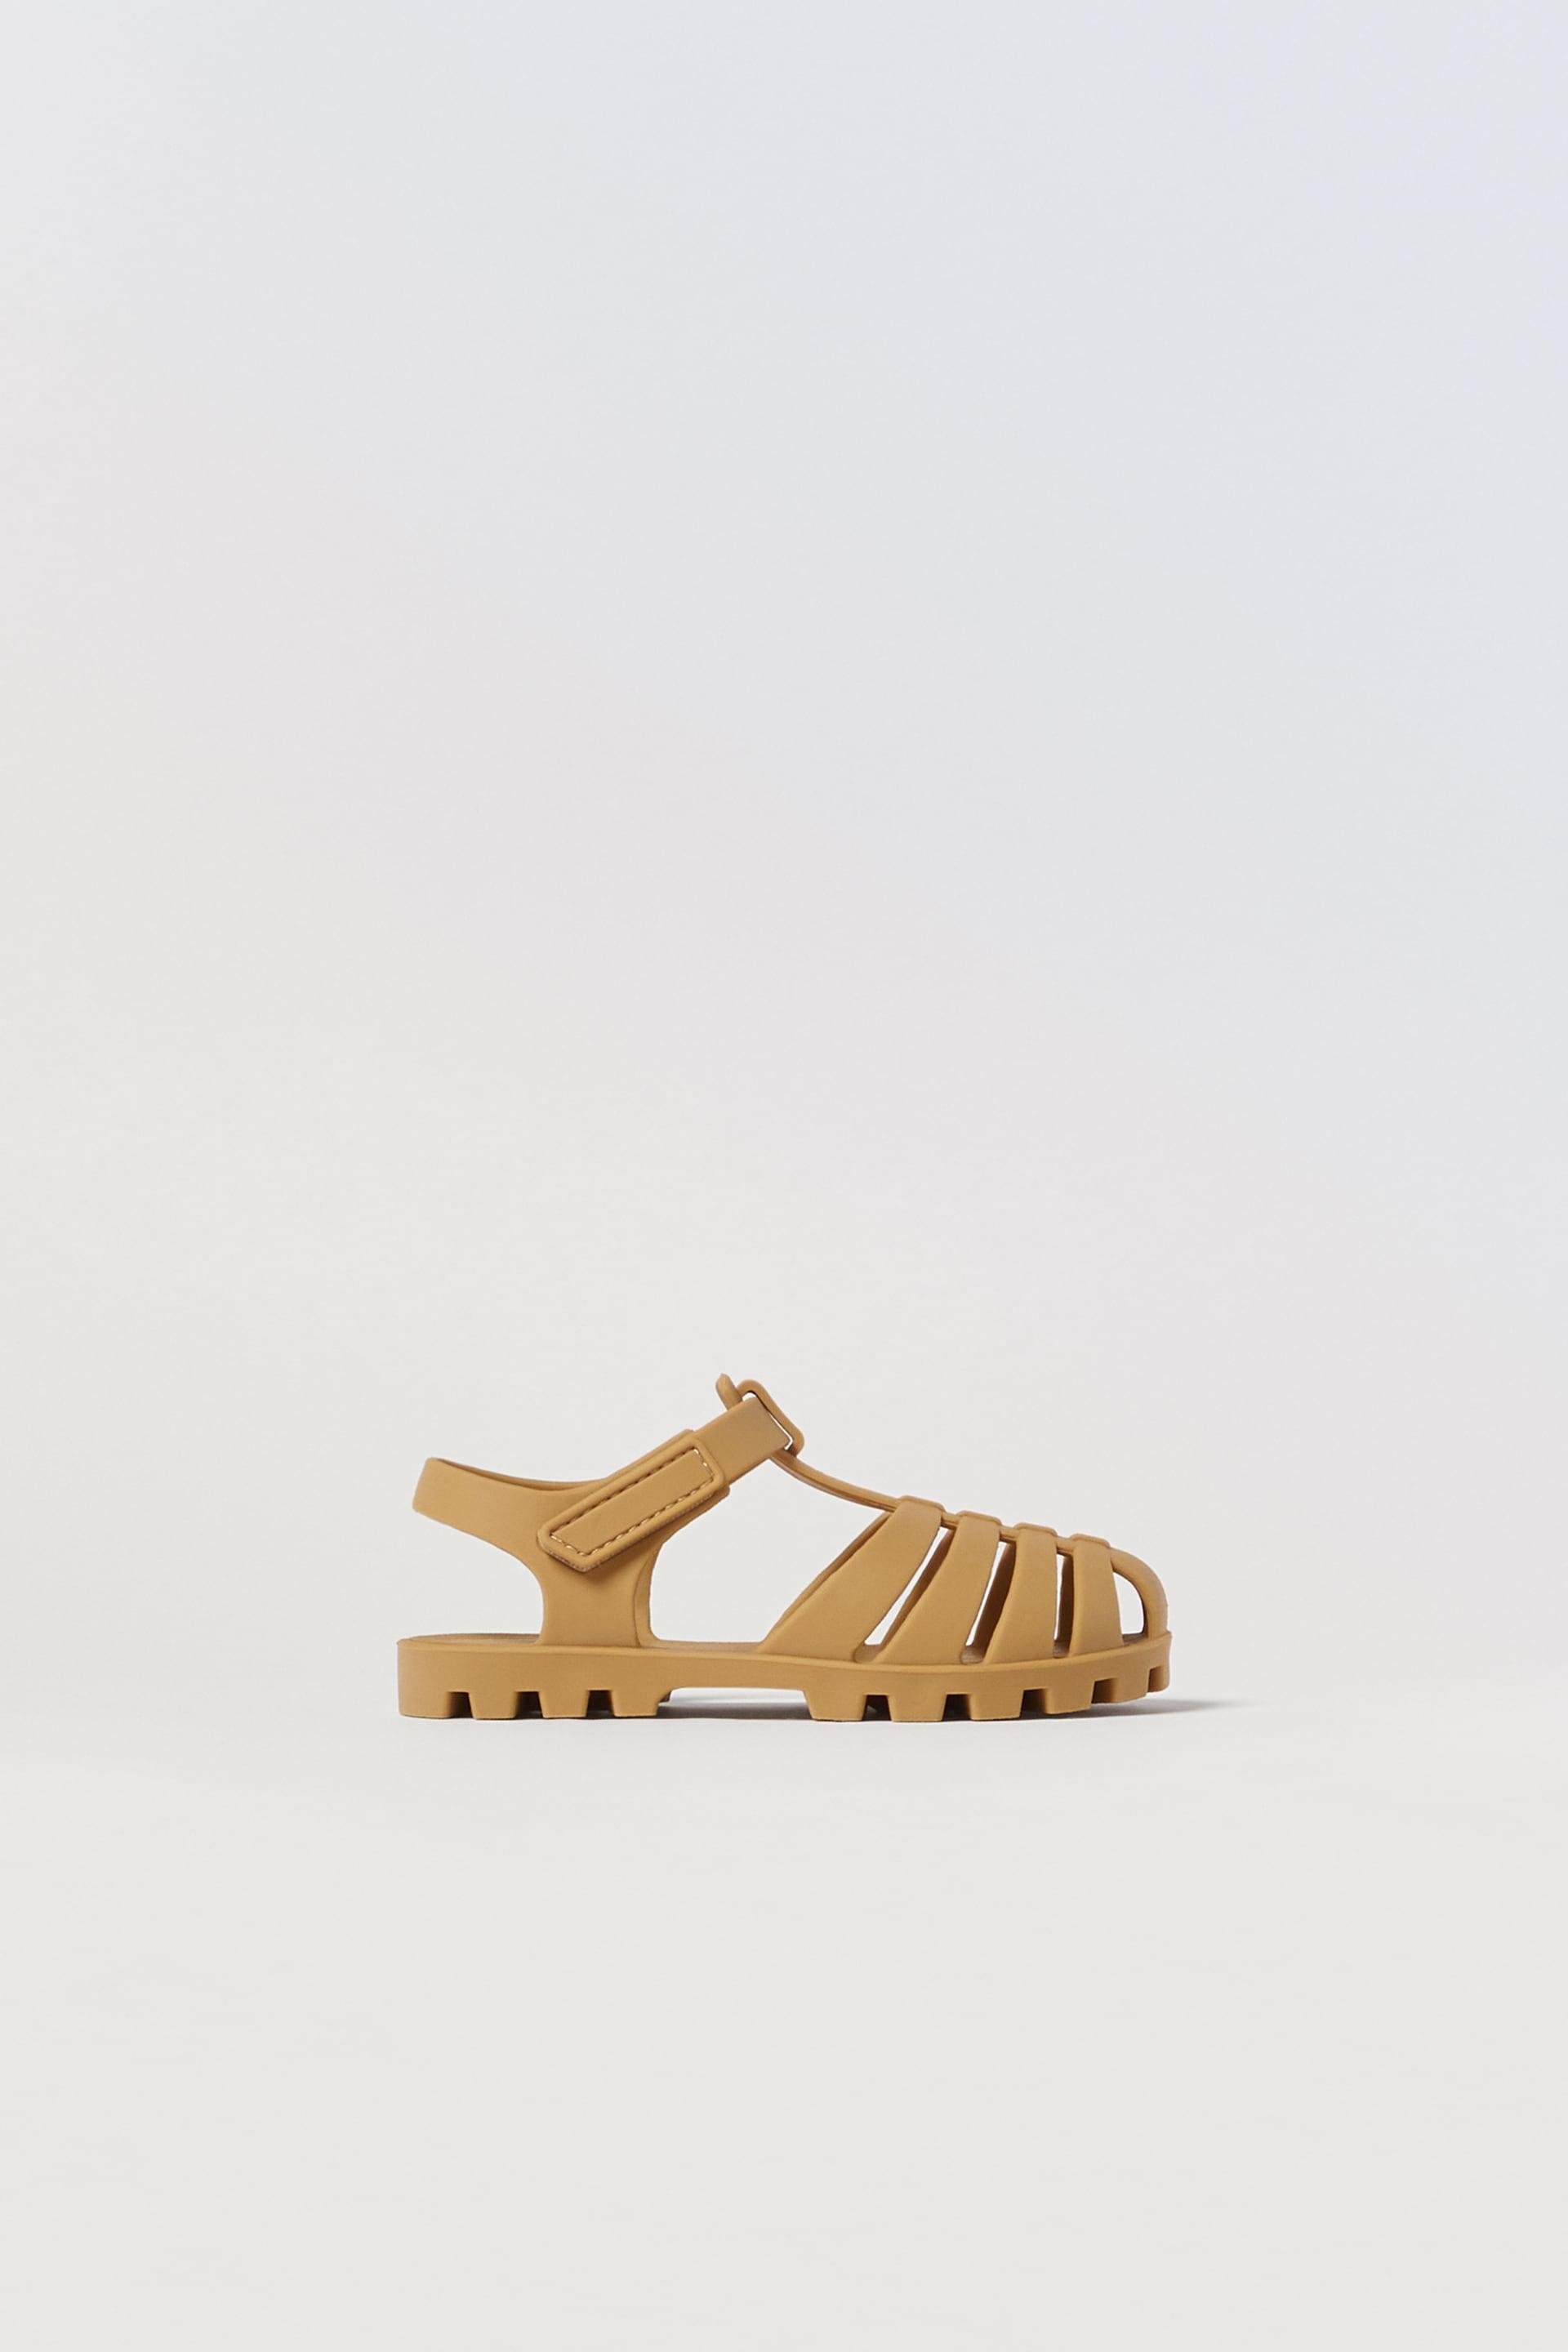 RUBBERIZED CAGE SANDALS by ZARA